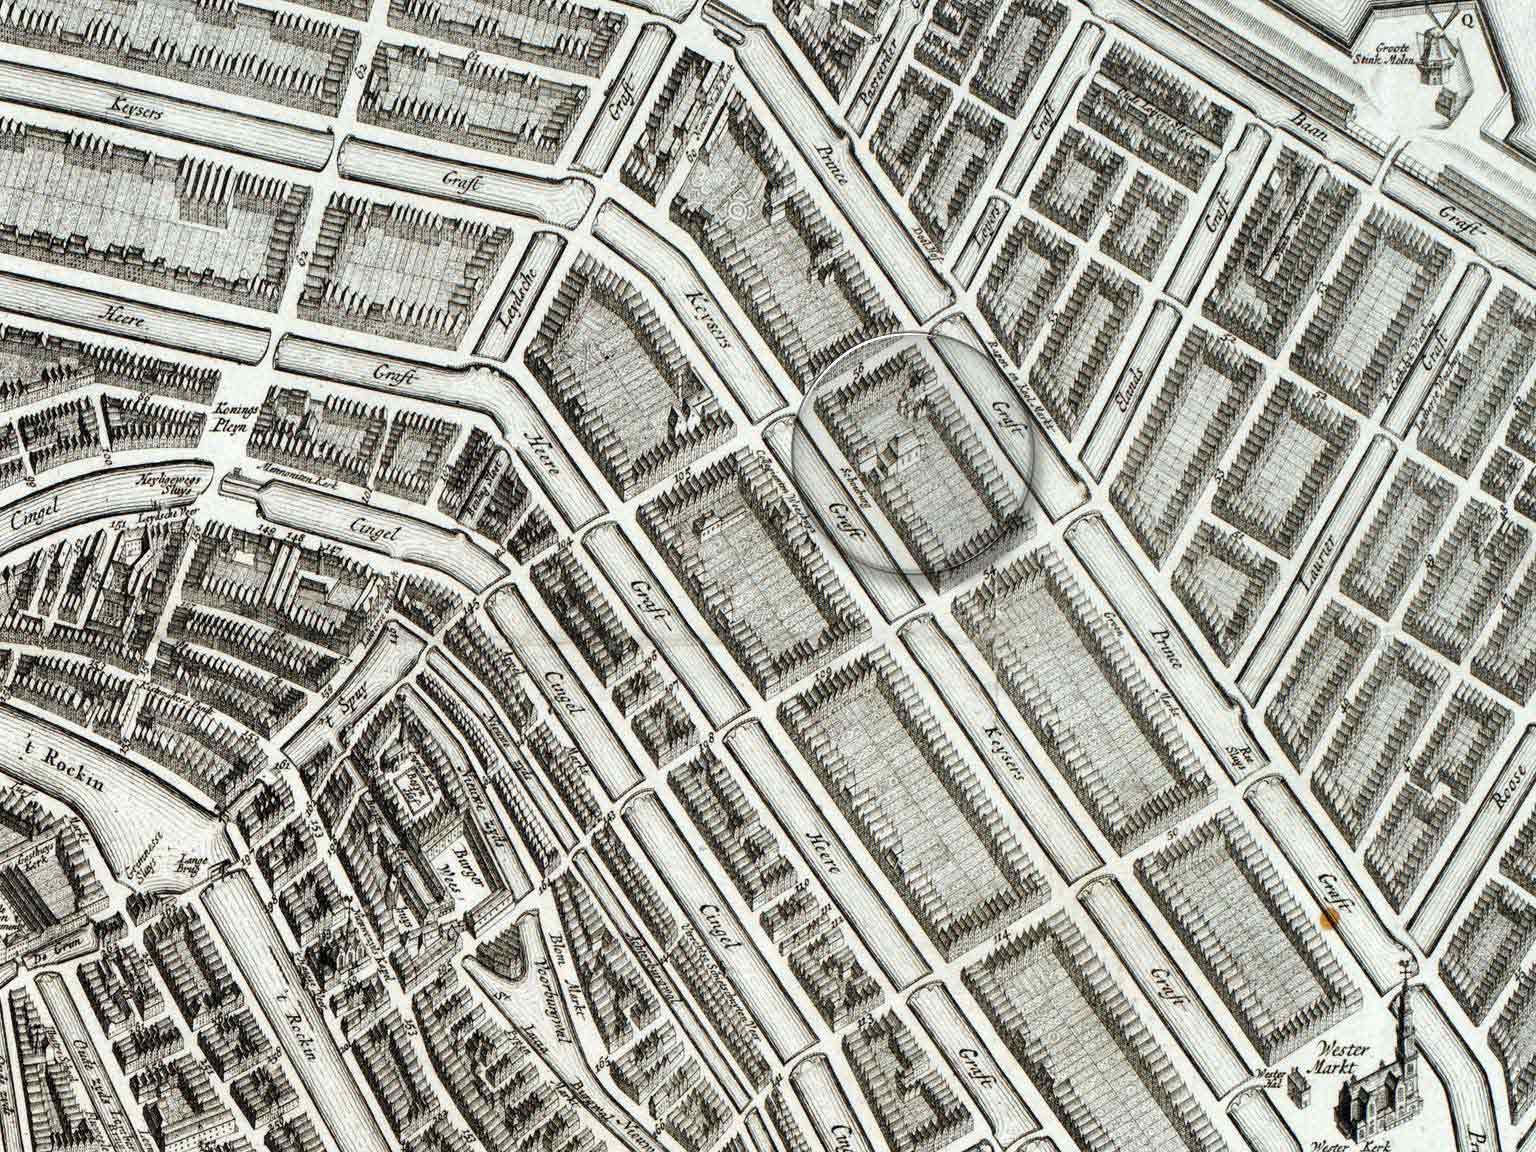 Old Municipal Theater on Keizersgracht, Amsterdam, detail of a map from 1737 by Gerrit de Broen